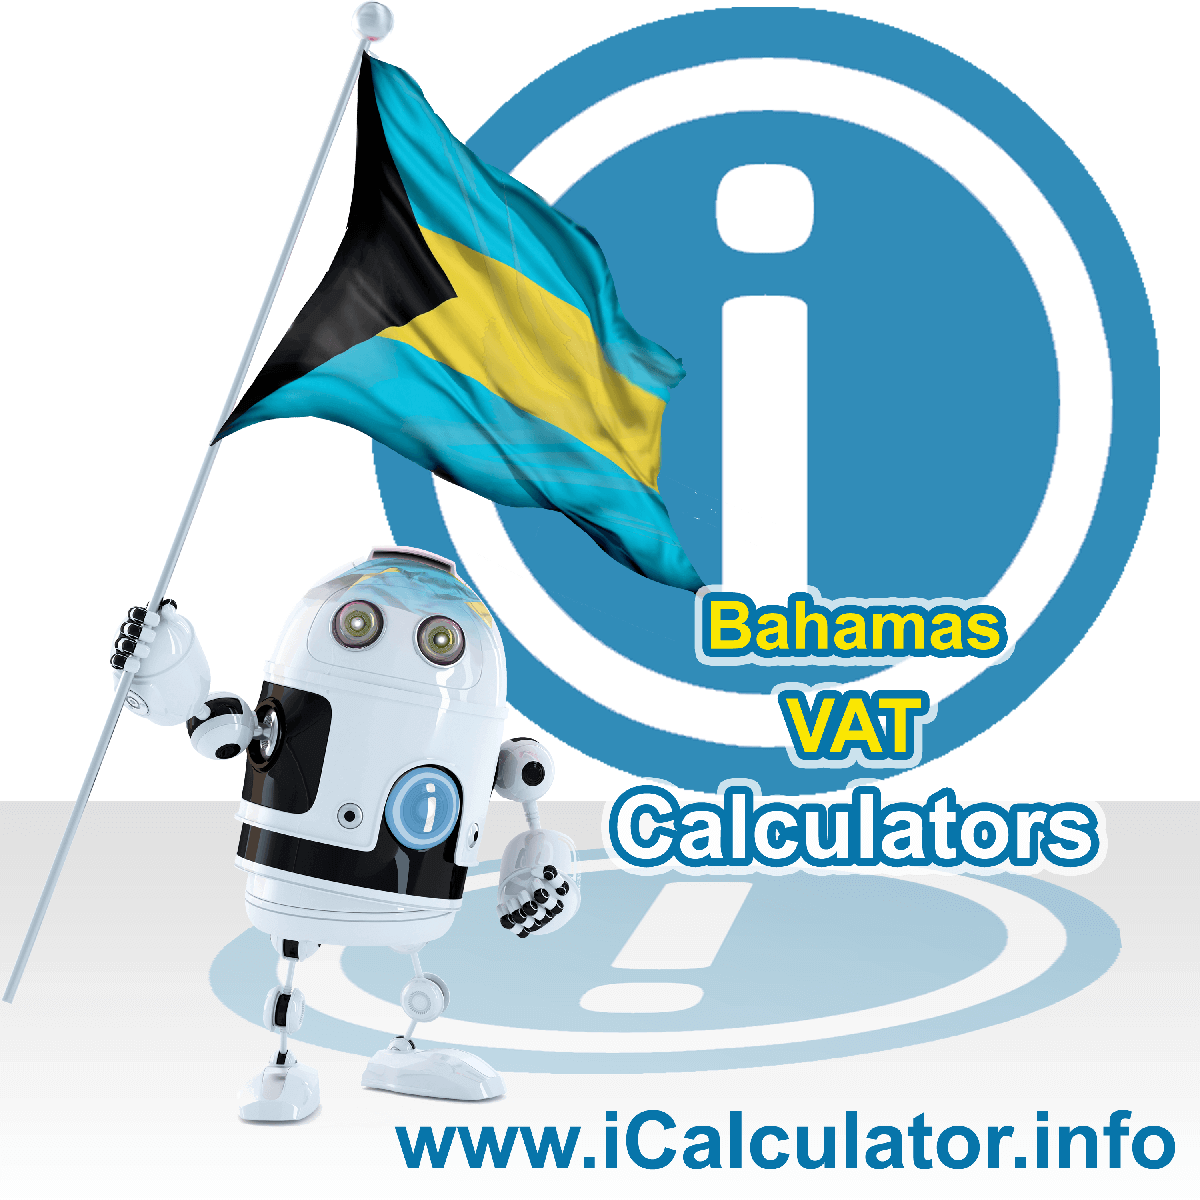 Bahamas VAT Calculator. This image shows the Bahamas flag and information relating to the VAT formula used for calculating Value Added Tax in Bahamas using the Bahamas VAT Calculator in 2023